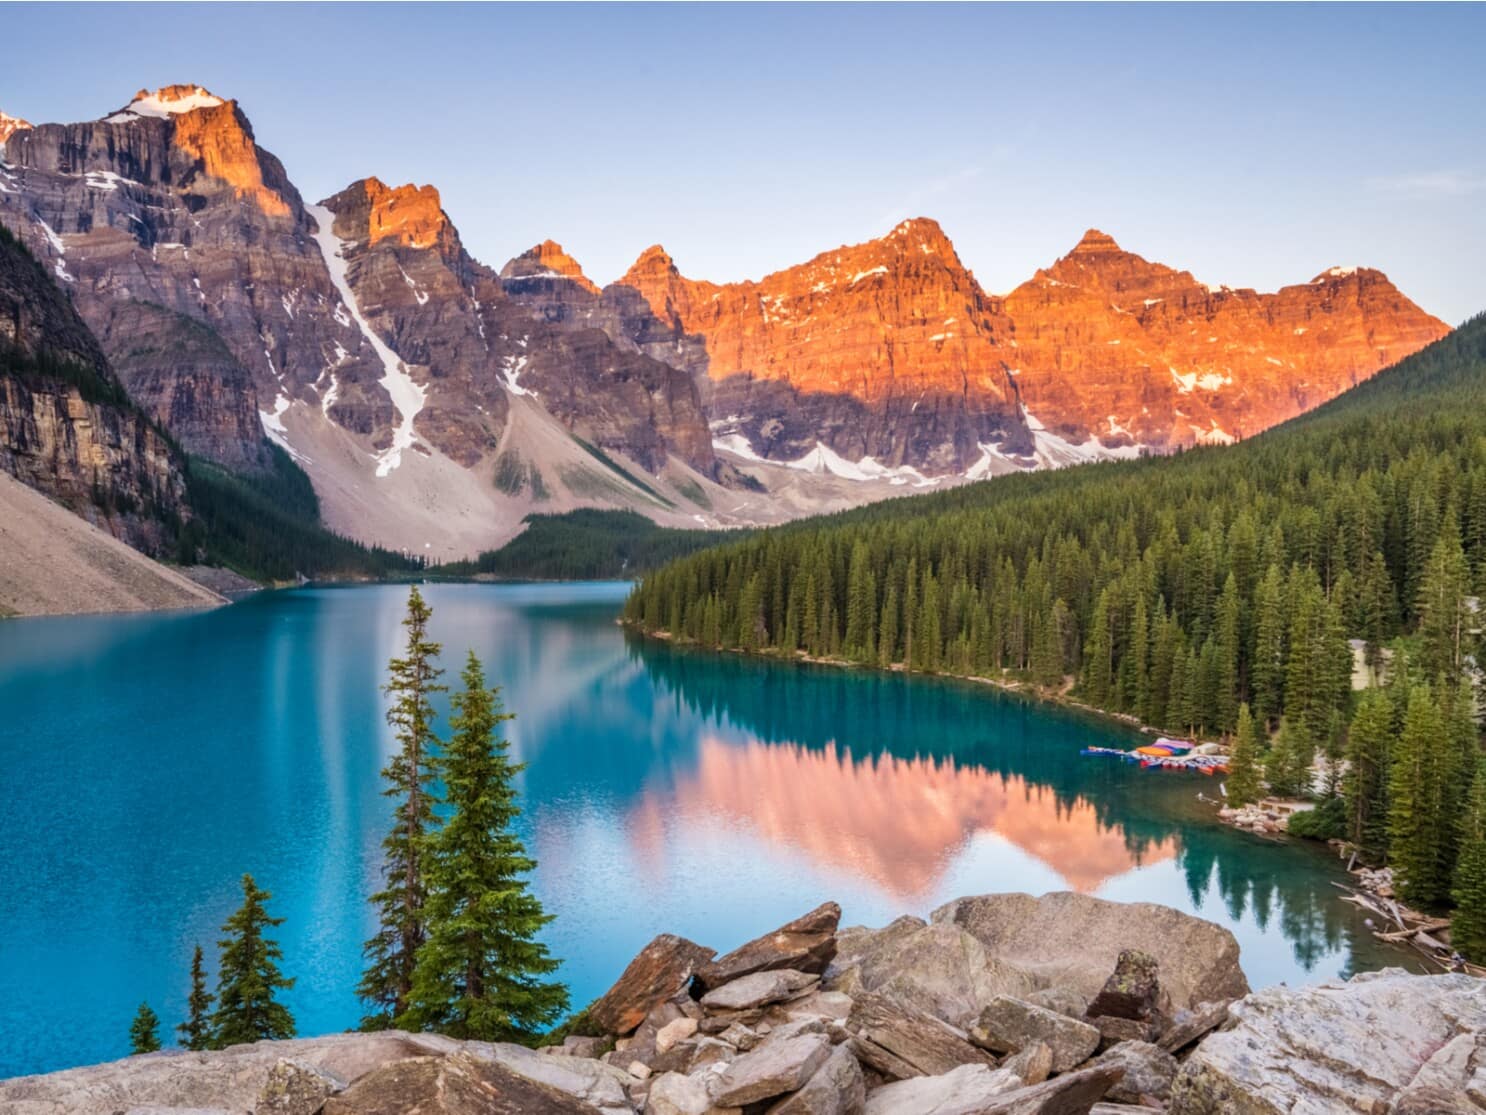 Banff National Park: A Paradise for Outdoor Enthusiasts